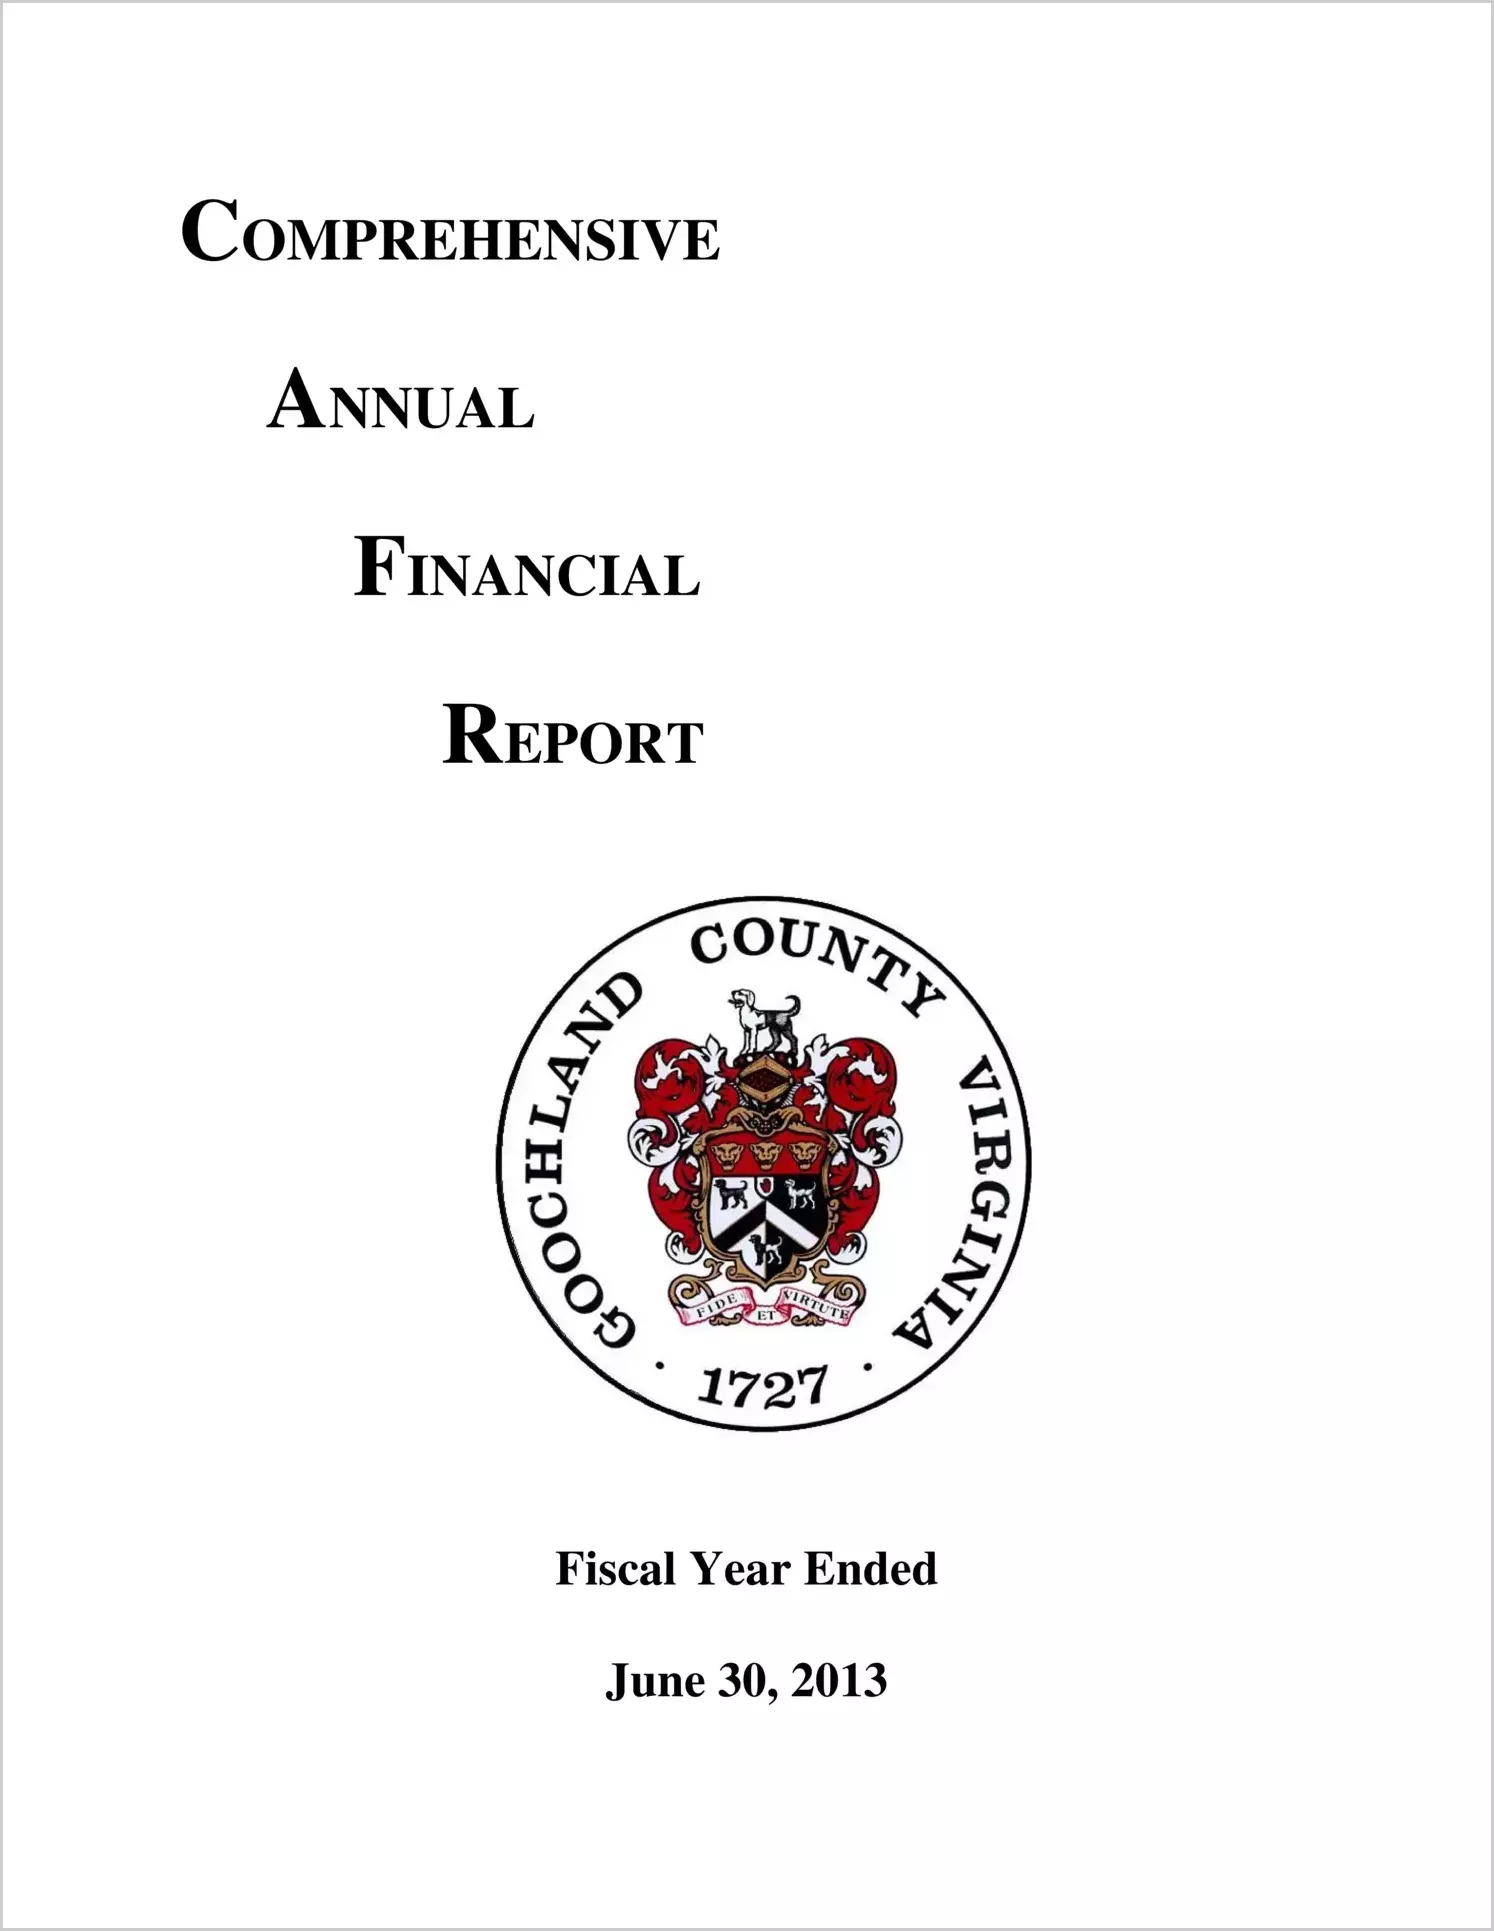 2013 Annual Financial Report for County of Goochland